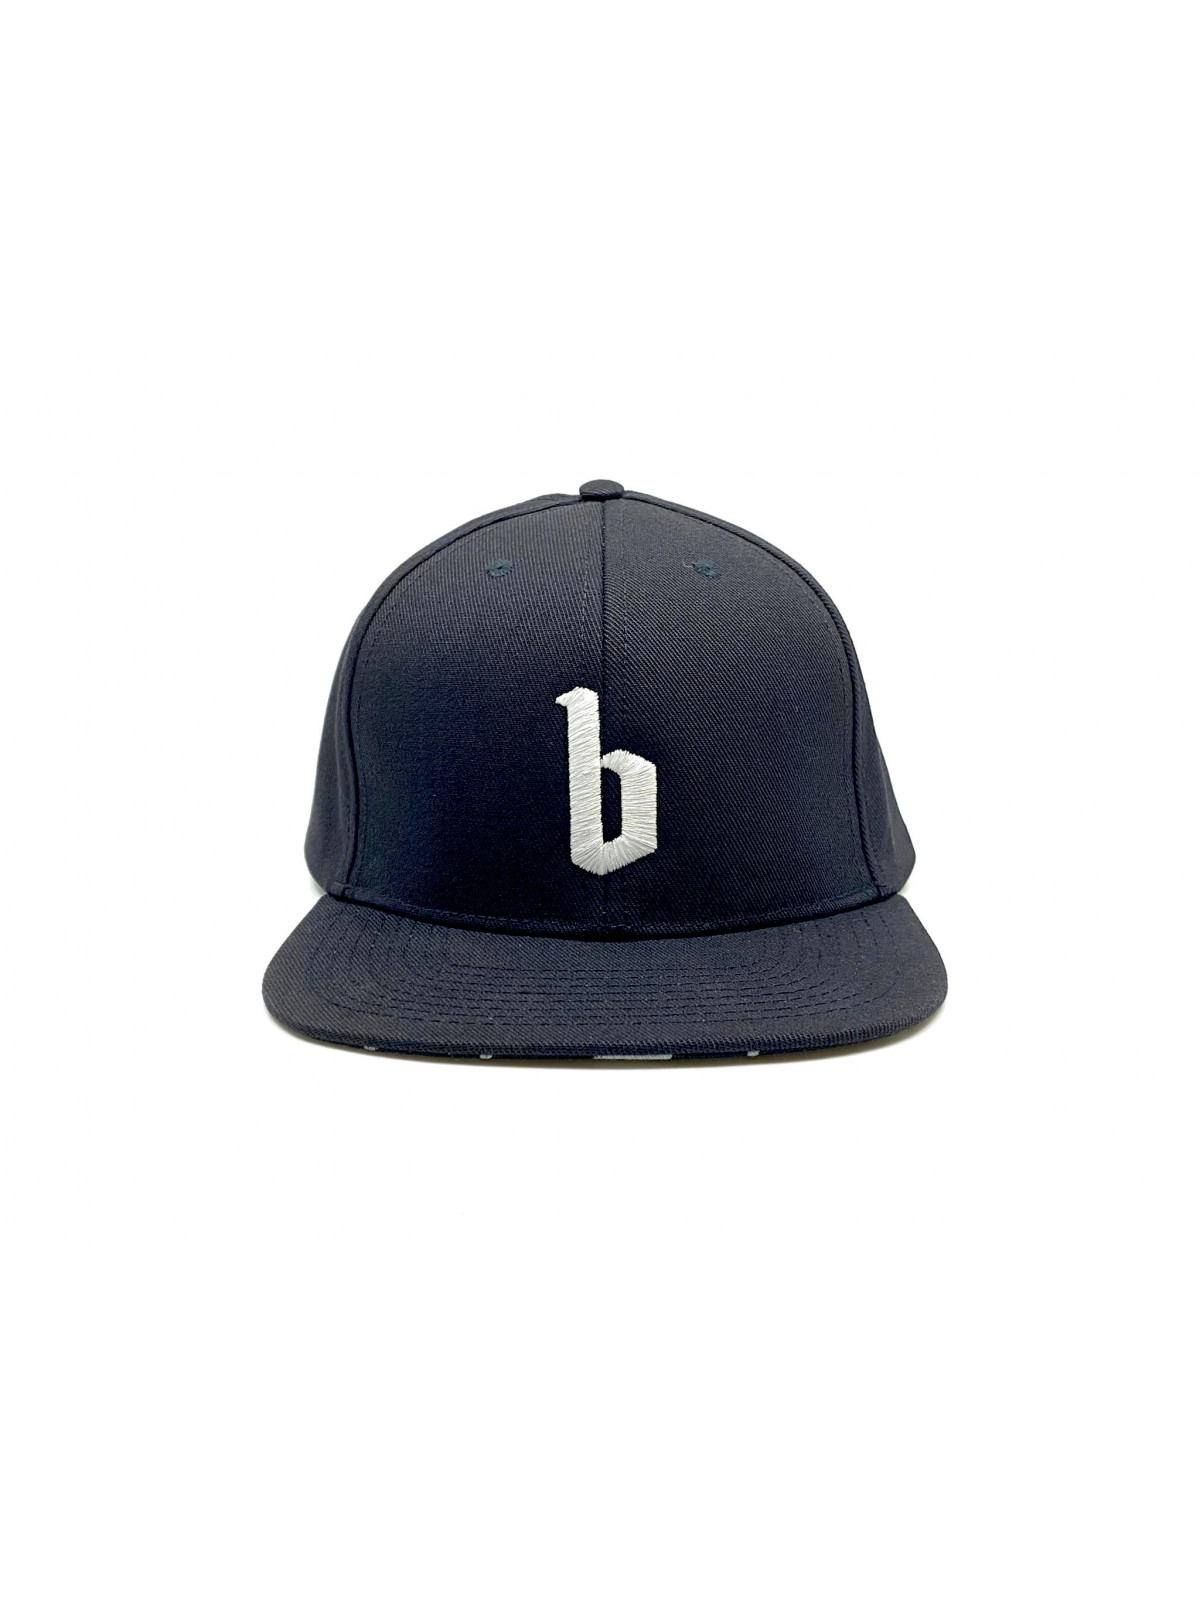 The 'Pattern' Snapback for men and women by swiss streetwear brand bastonnade clothing.